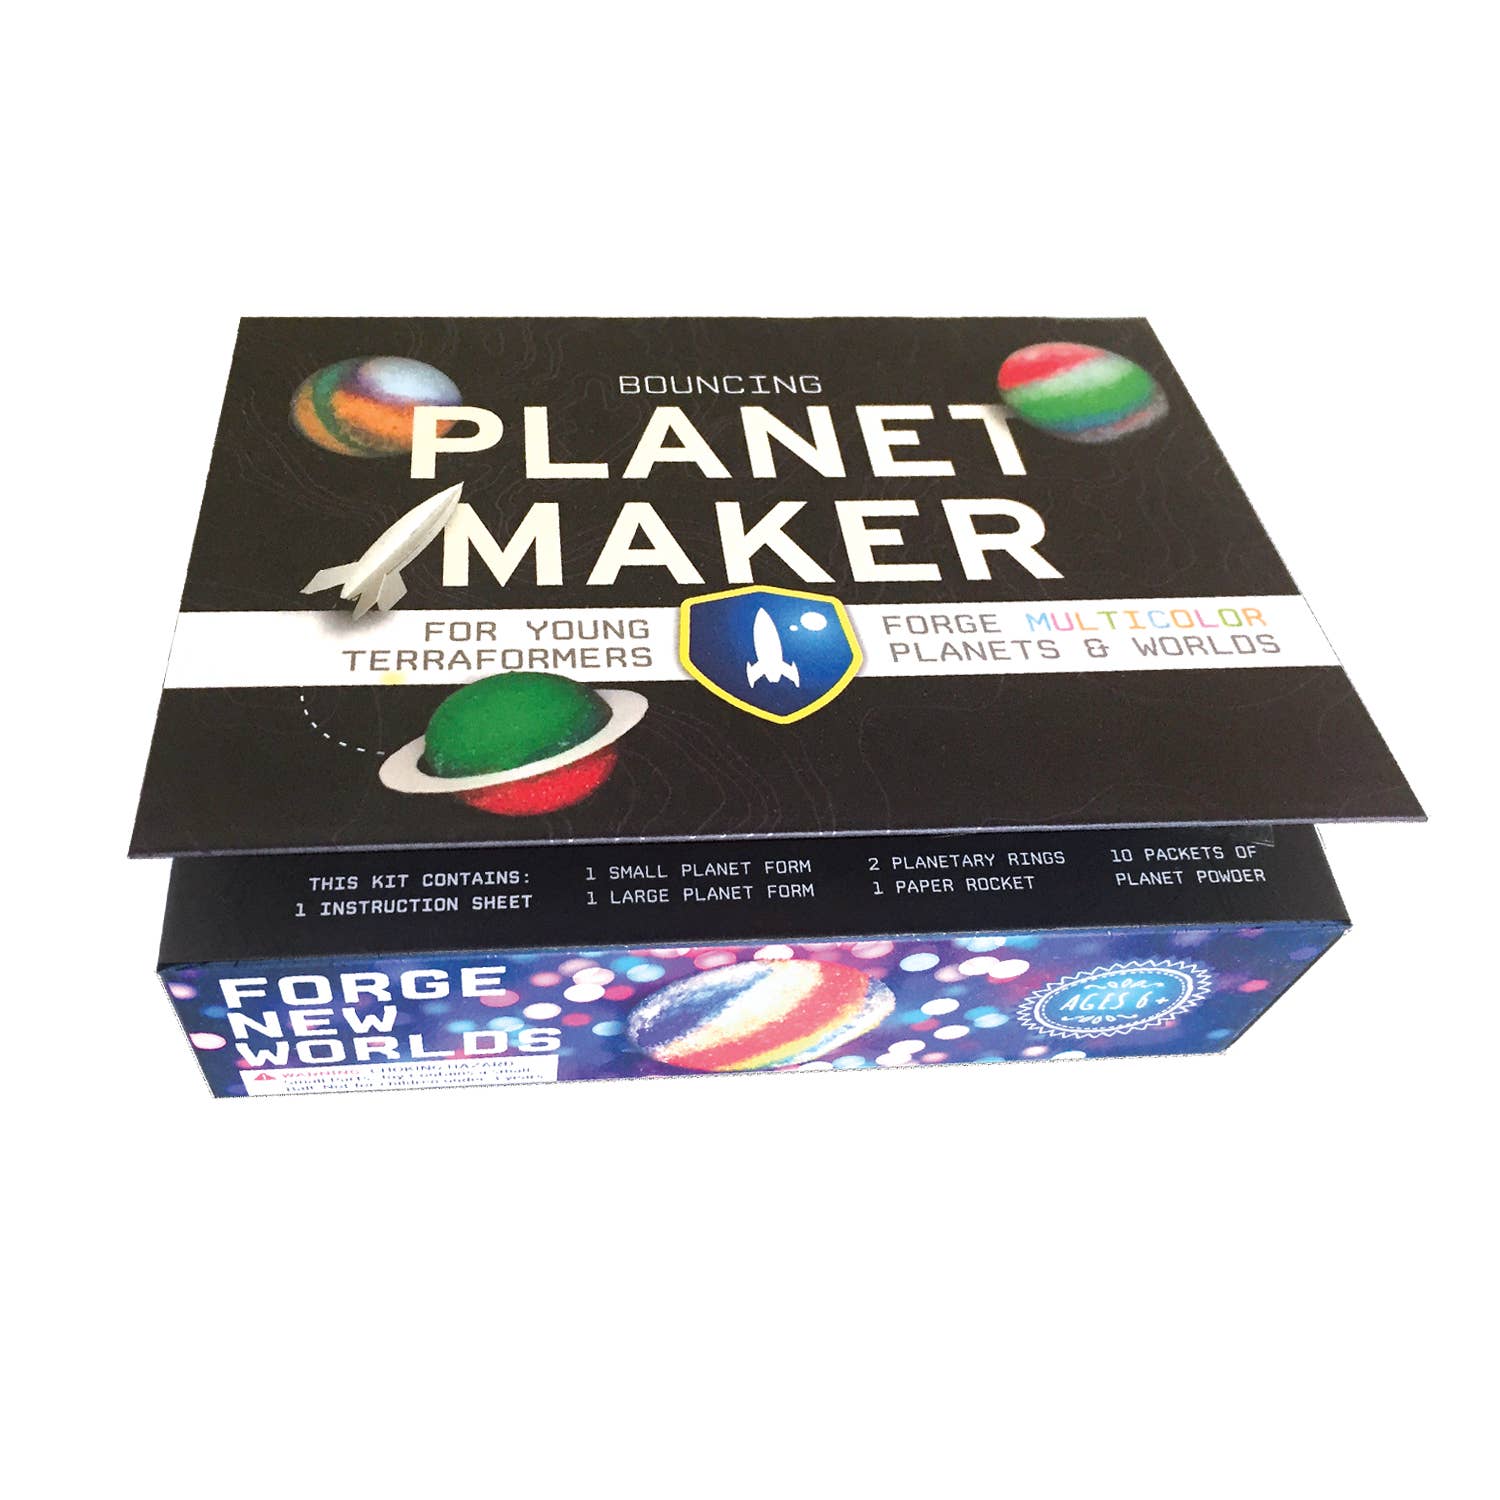 A black box says "bouncing planet maker"  and shows three planet-colored bouncy balls that can be made from the kit